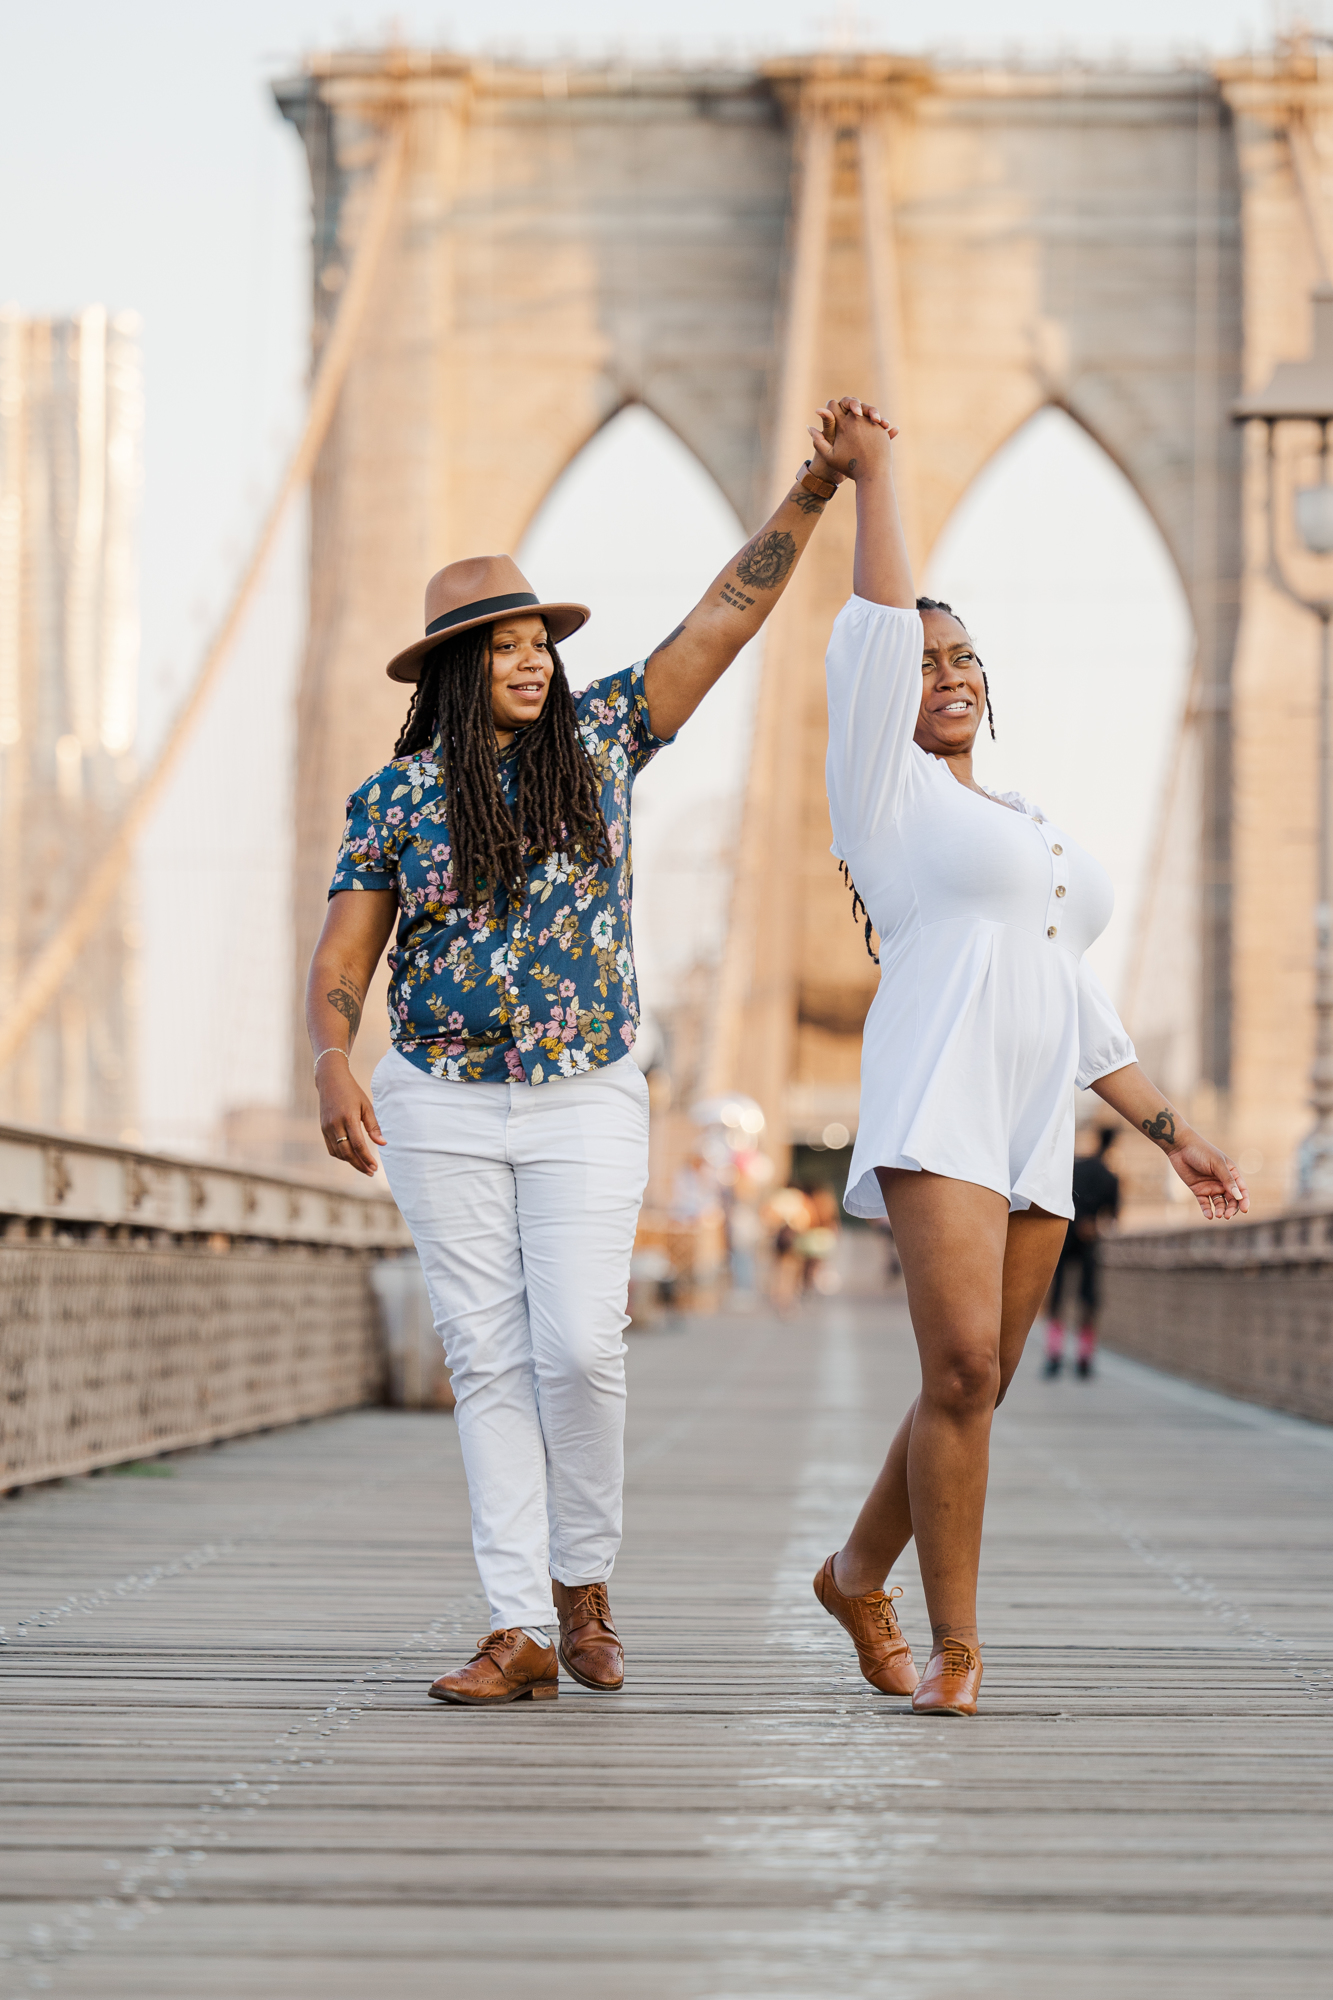 Playful Summer Engagement Photography in DUMBO